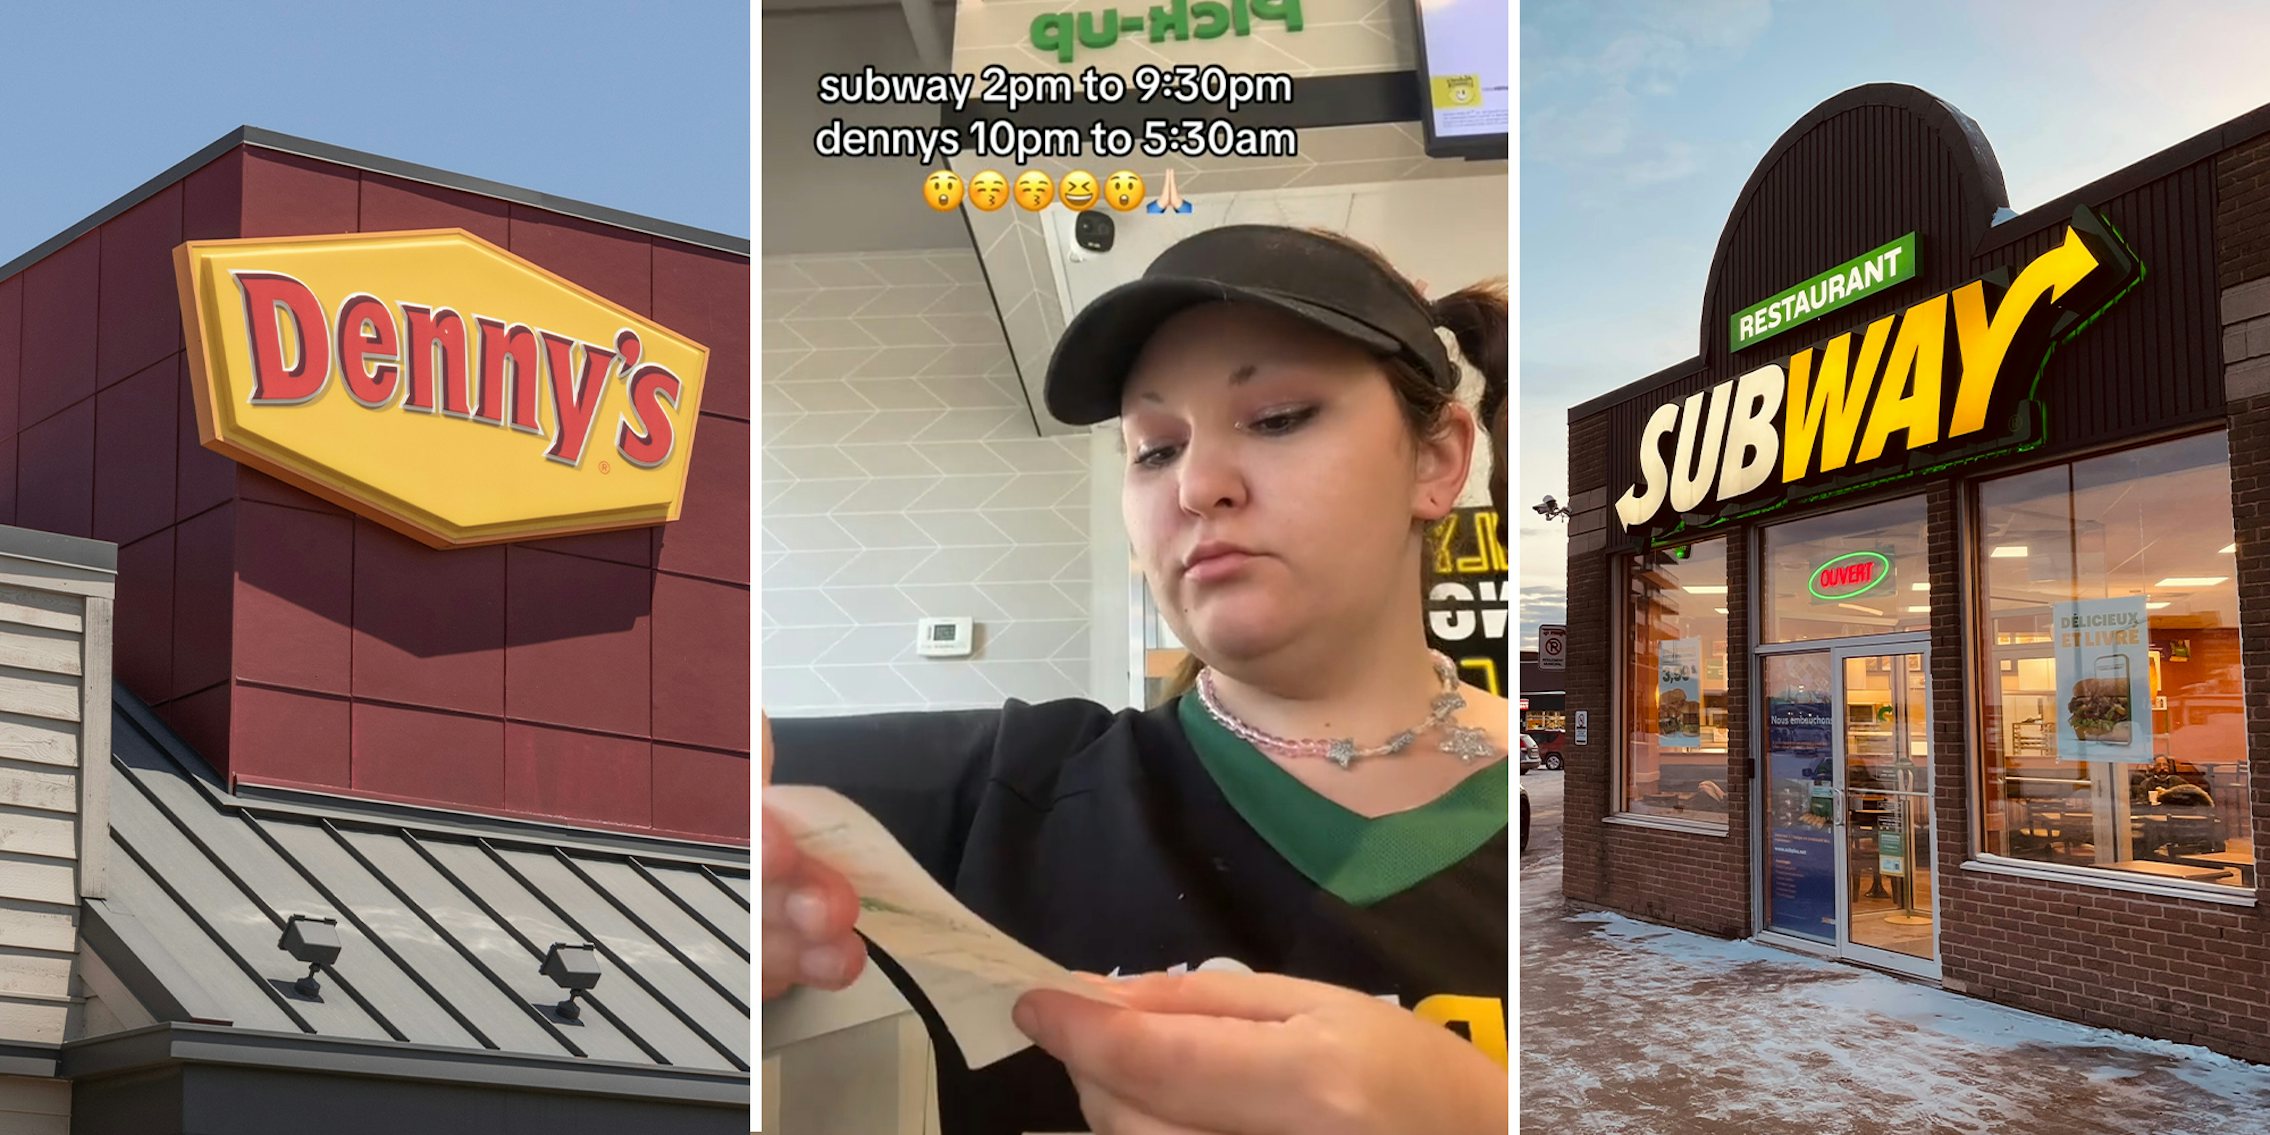 Subway worker clocks out after 7.5 hour shift, only to start another 7.5 hour shift at Denny’s